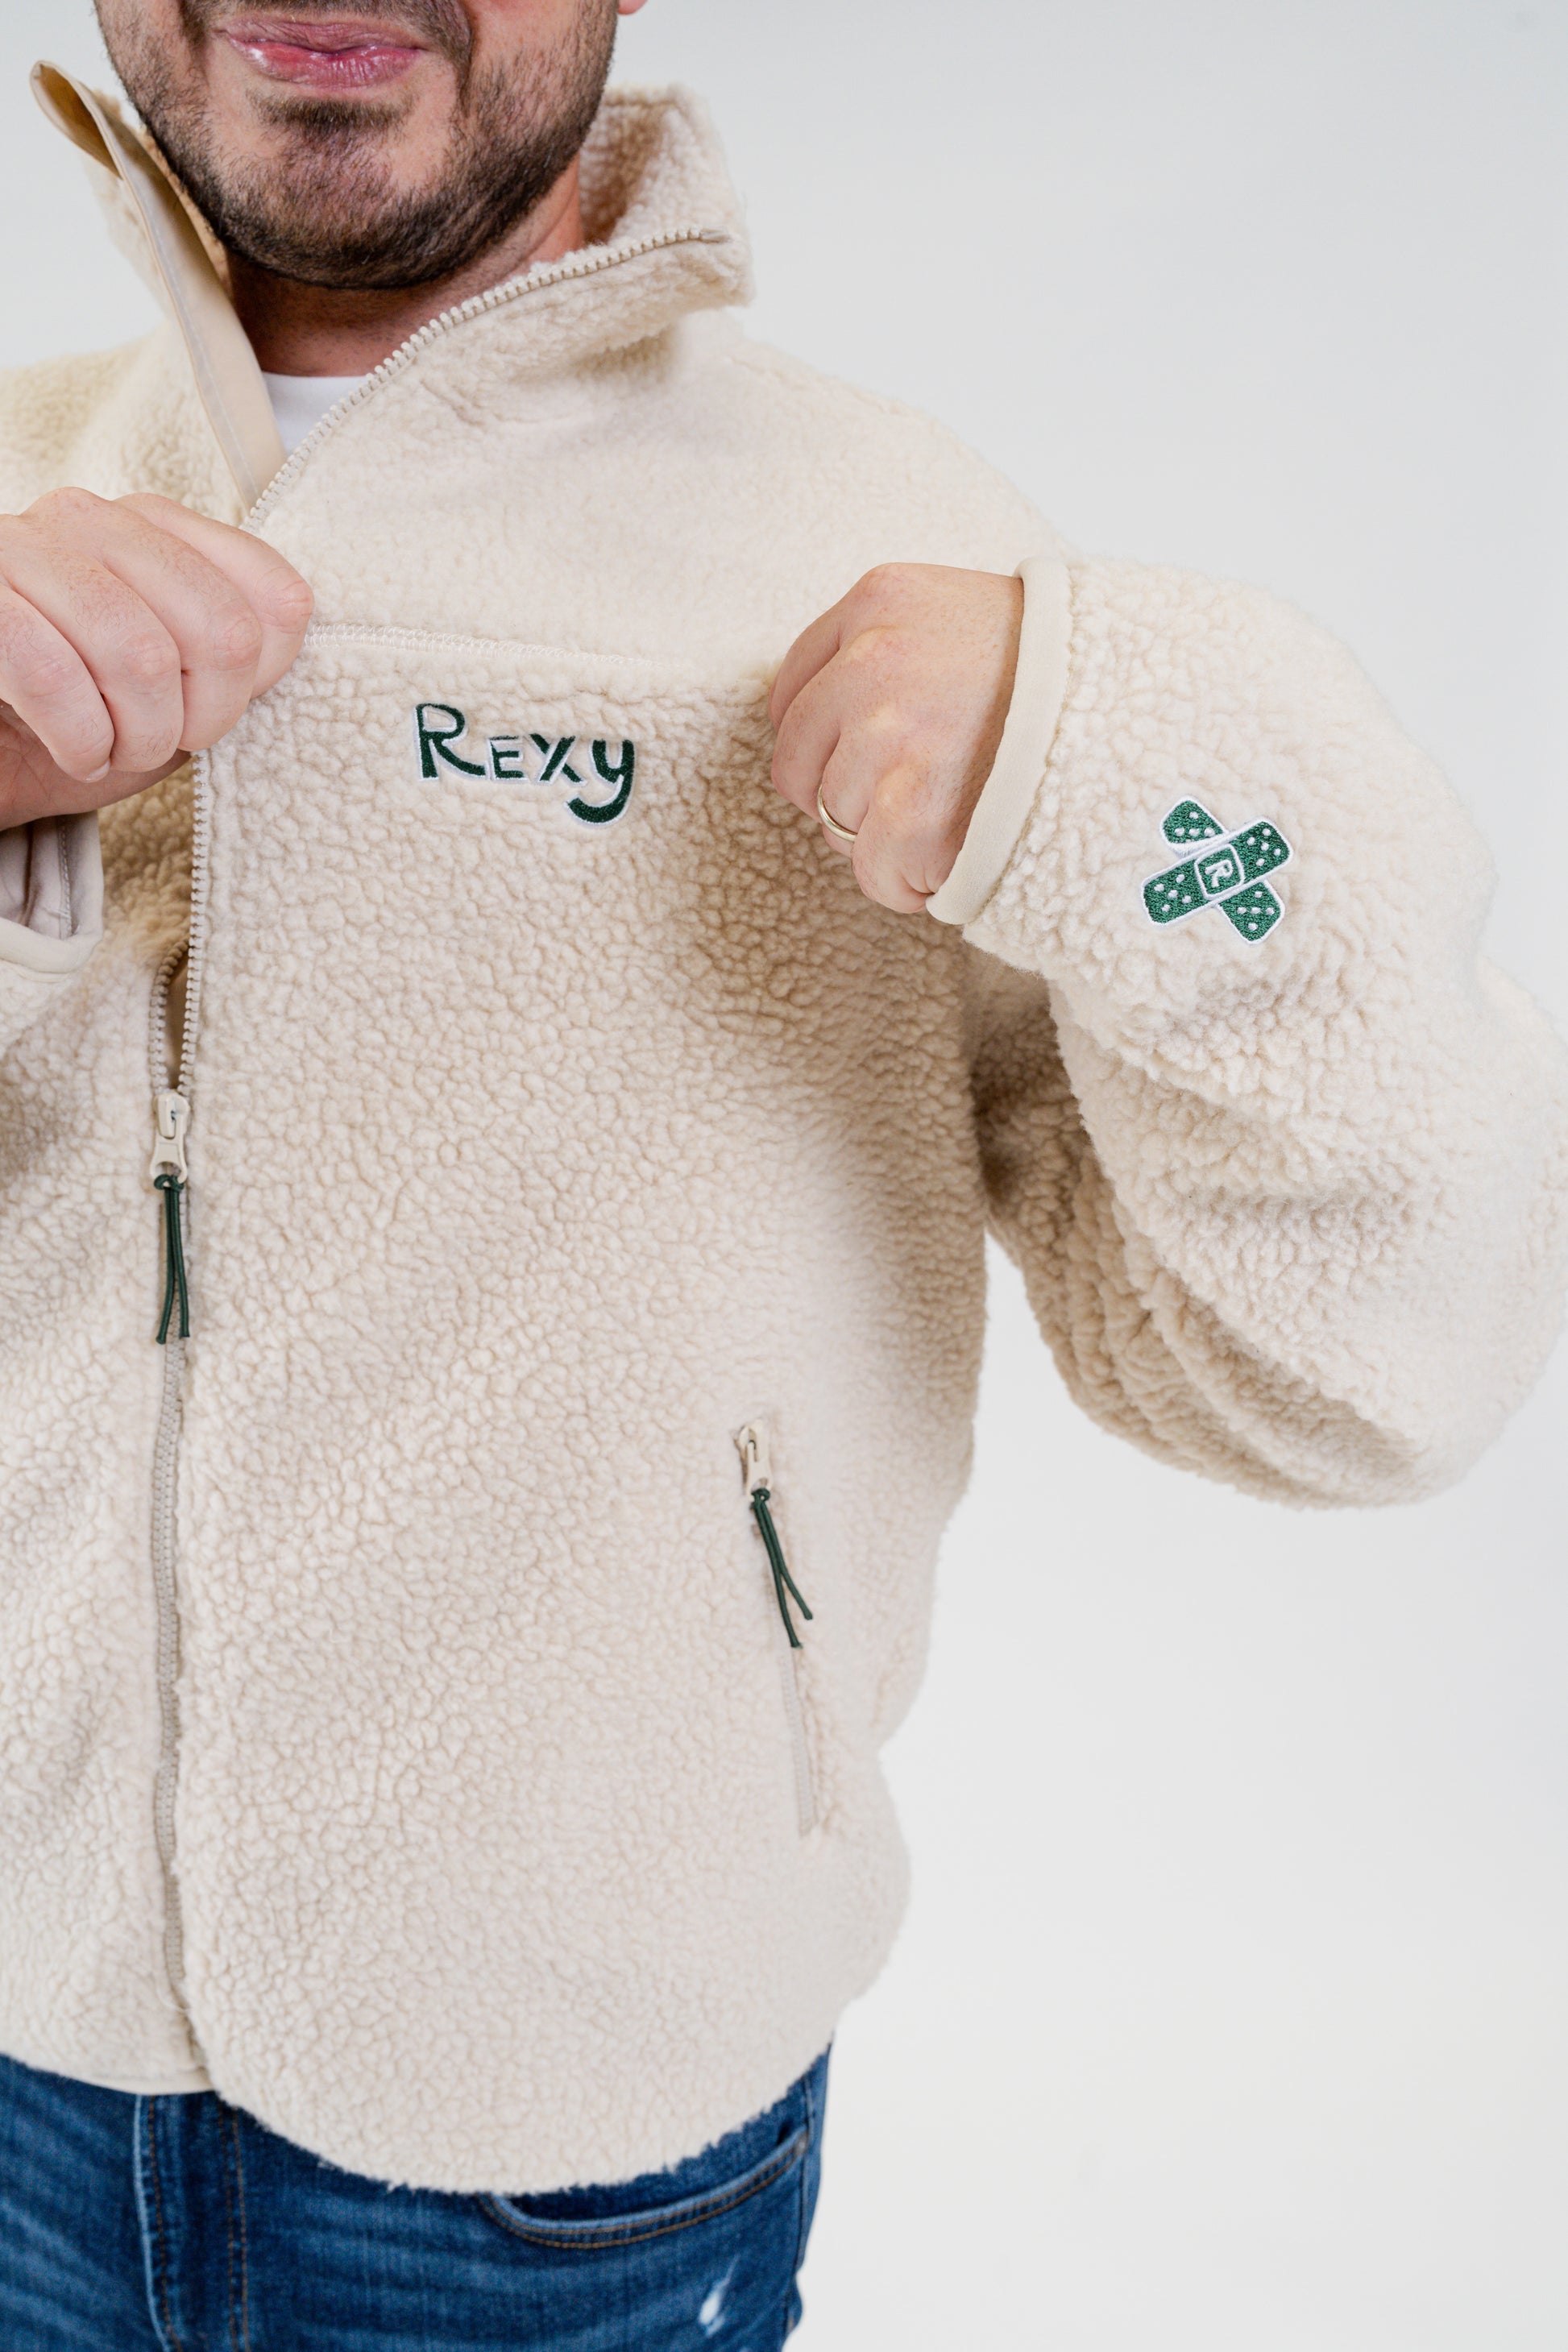 Rexy cream sherpa jacket made from high quality soft wool.